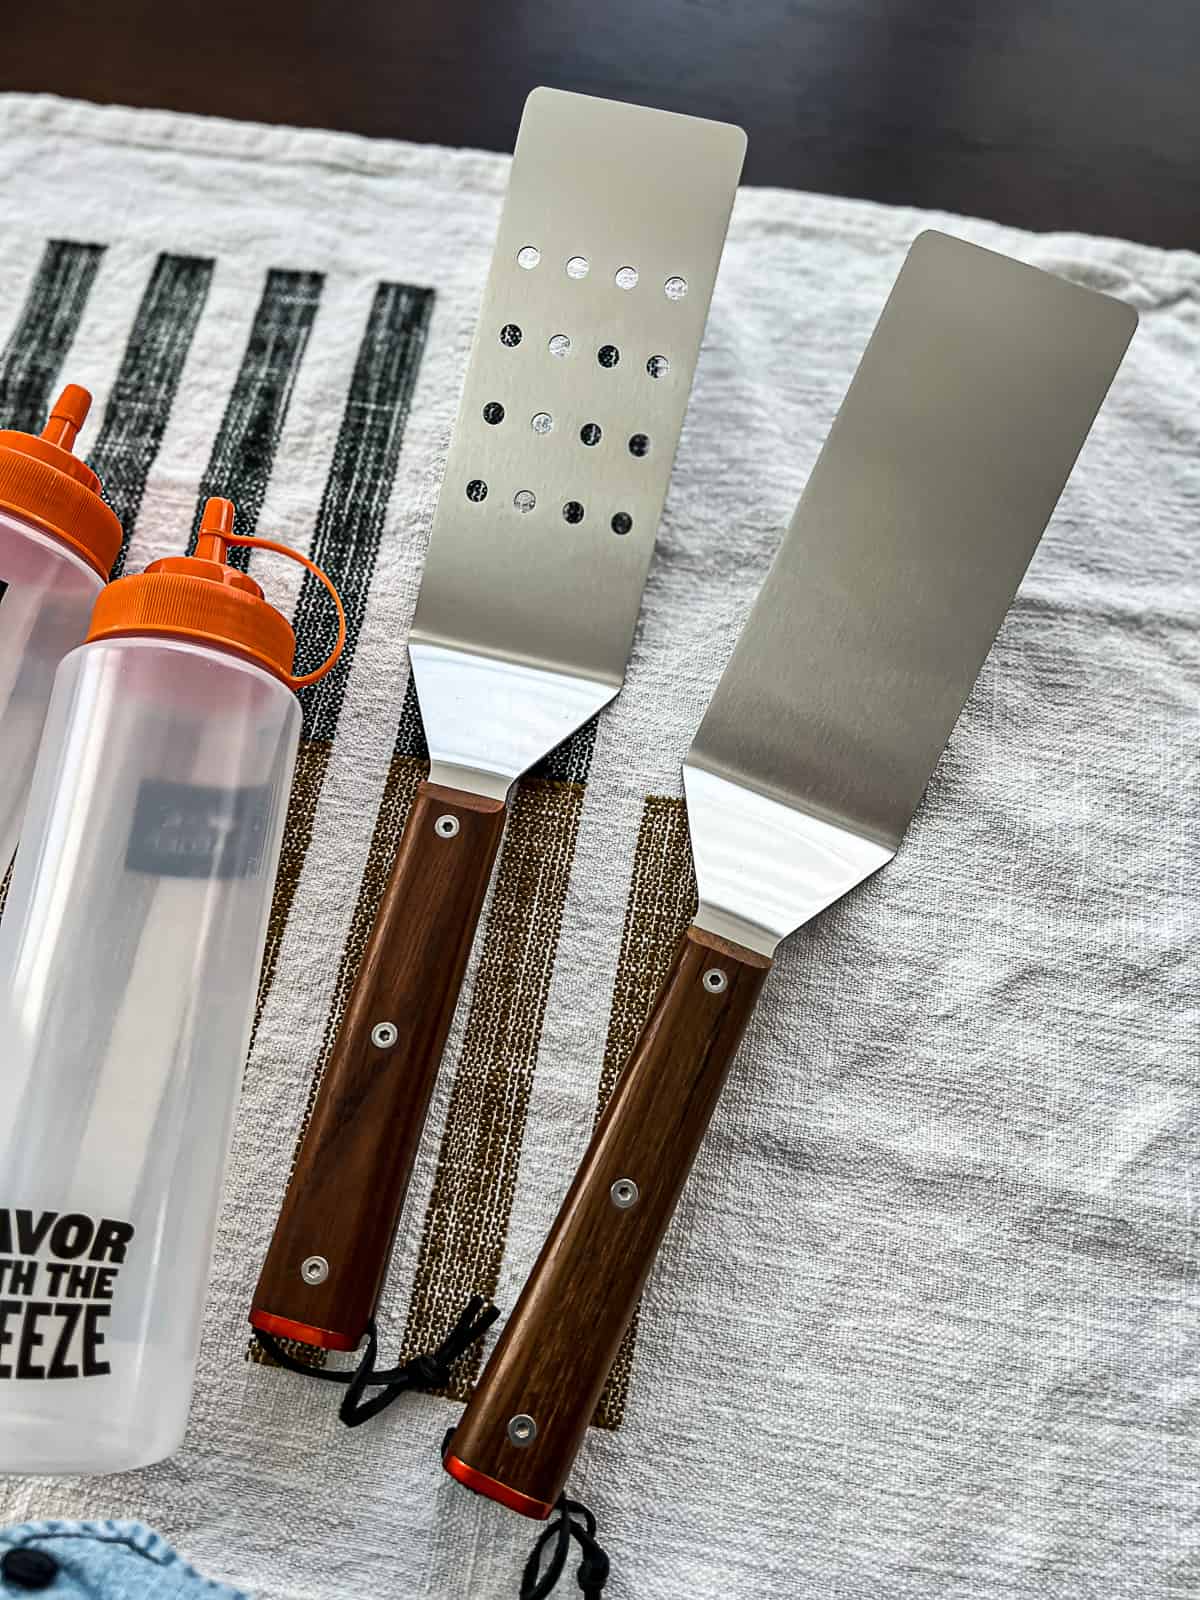 Traeger Flatrock Griddle Accessories with hibatchi spatulas and squeeze bottles